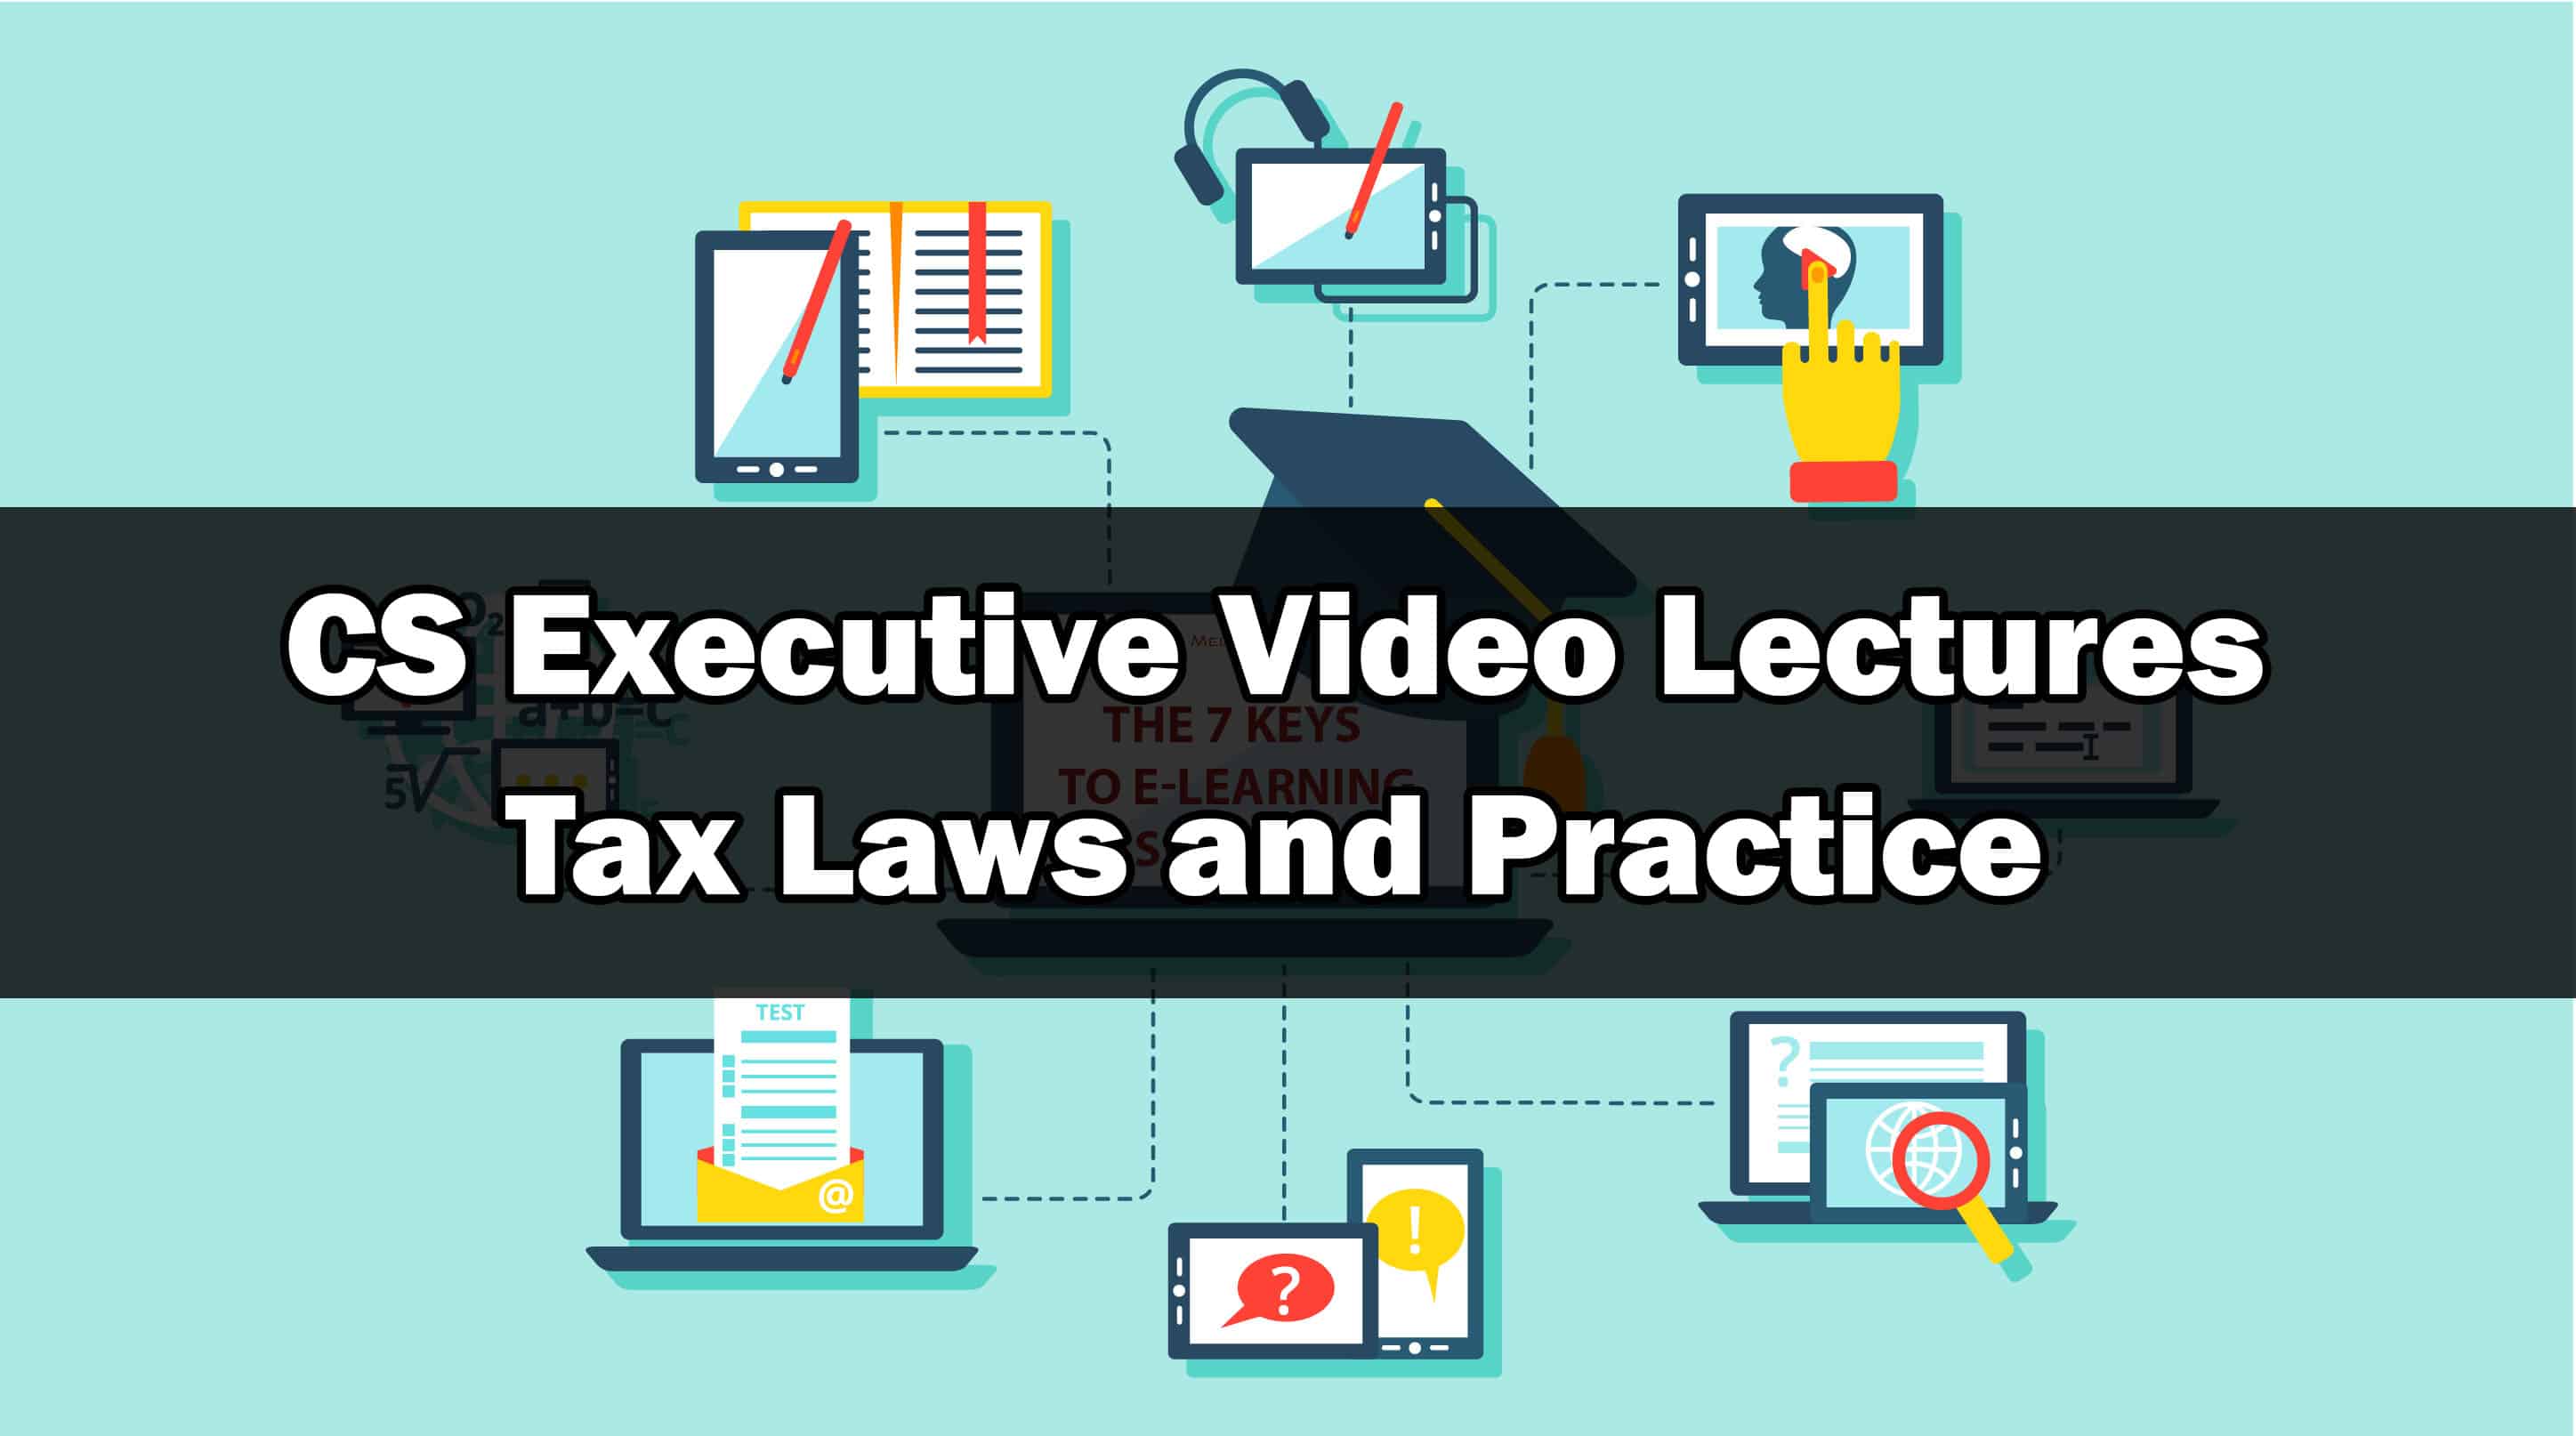 CS Executive Tax Laws Video Lectures